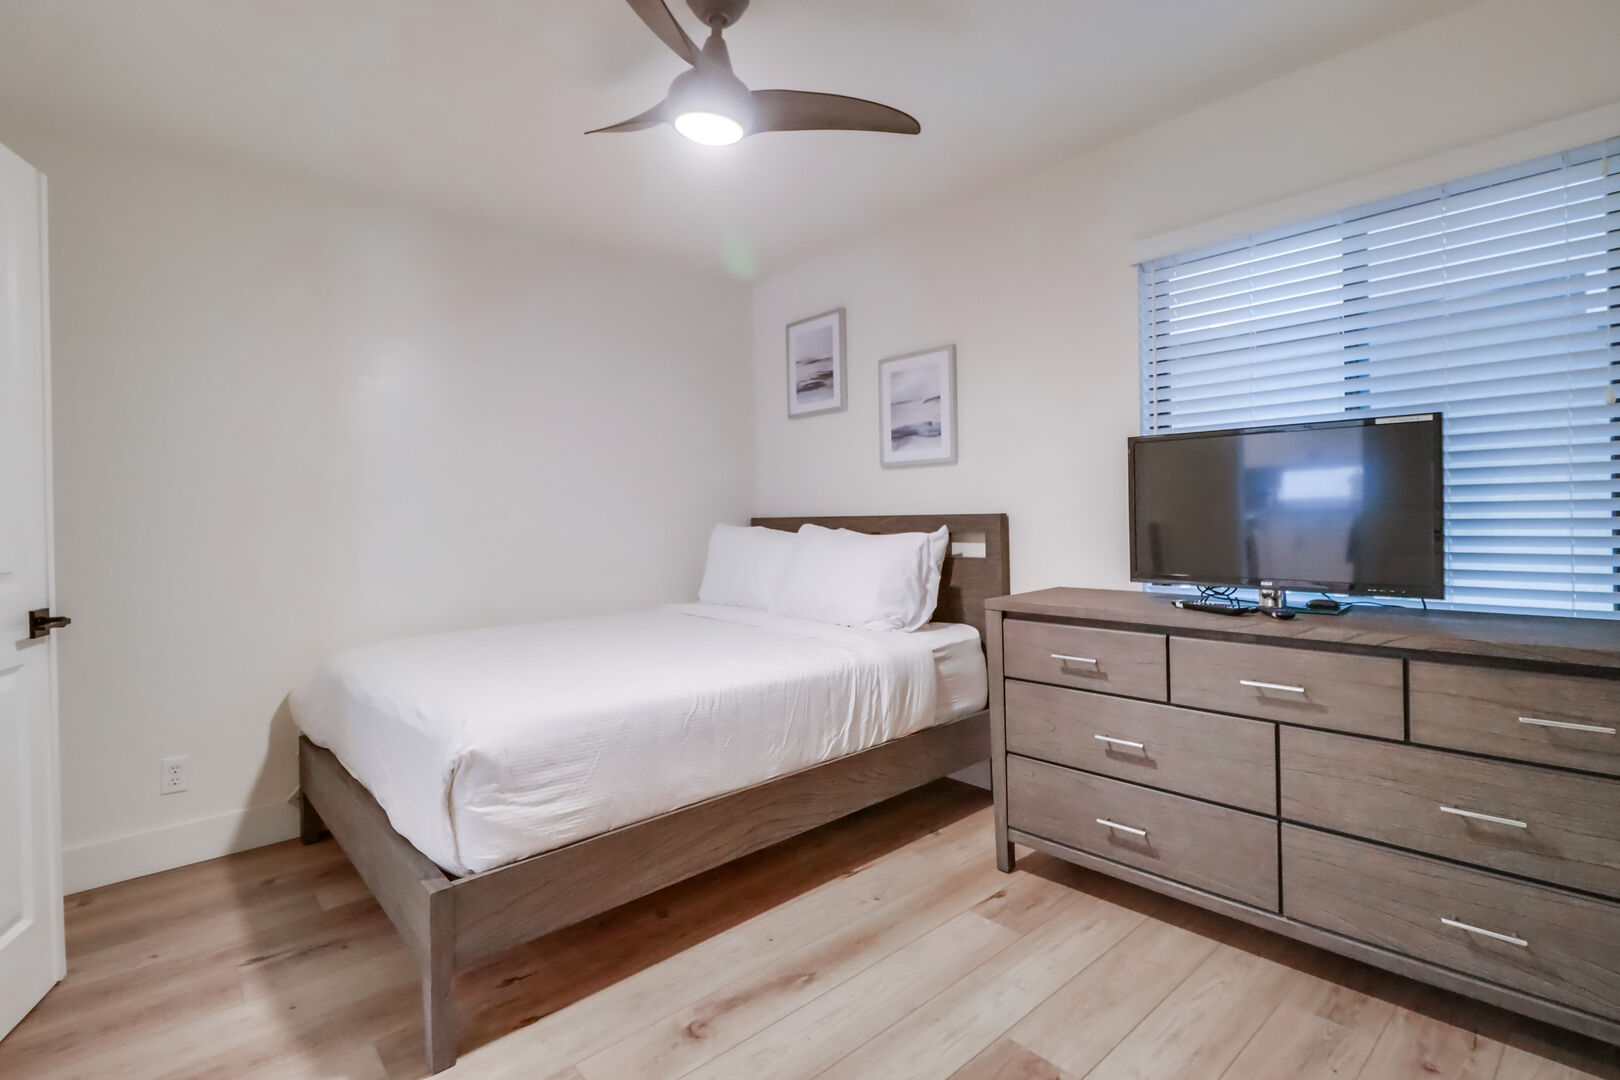 Guest bedroom, first bedroom from the living space, with a queen bed, dresser, ceiling fan, closet and Smart TV